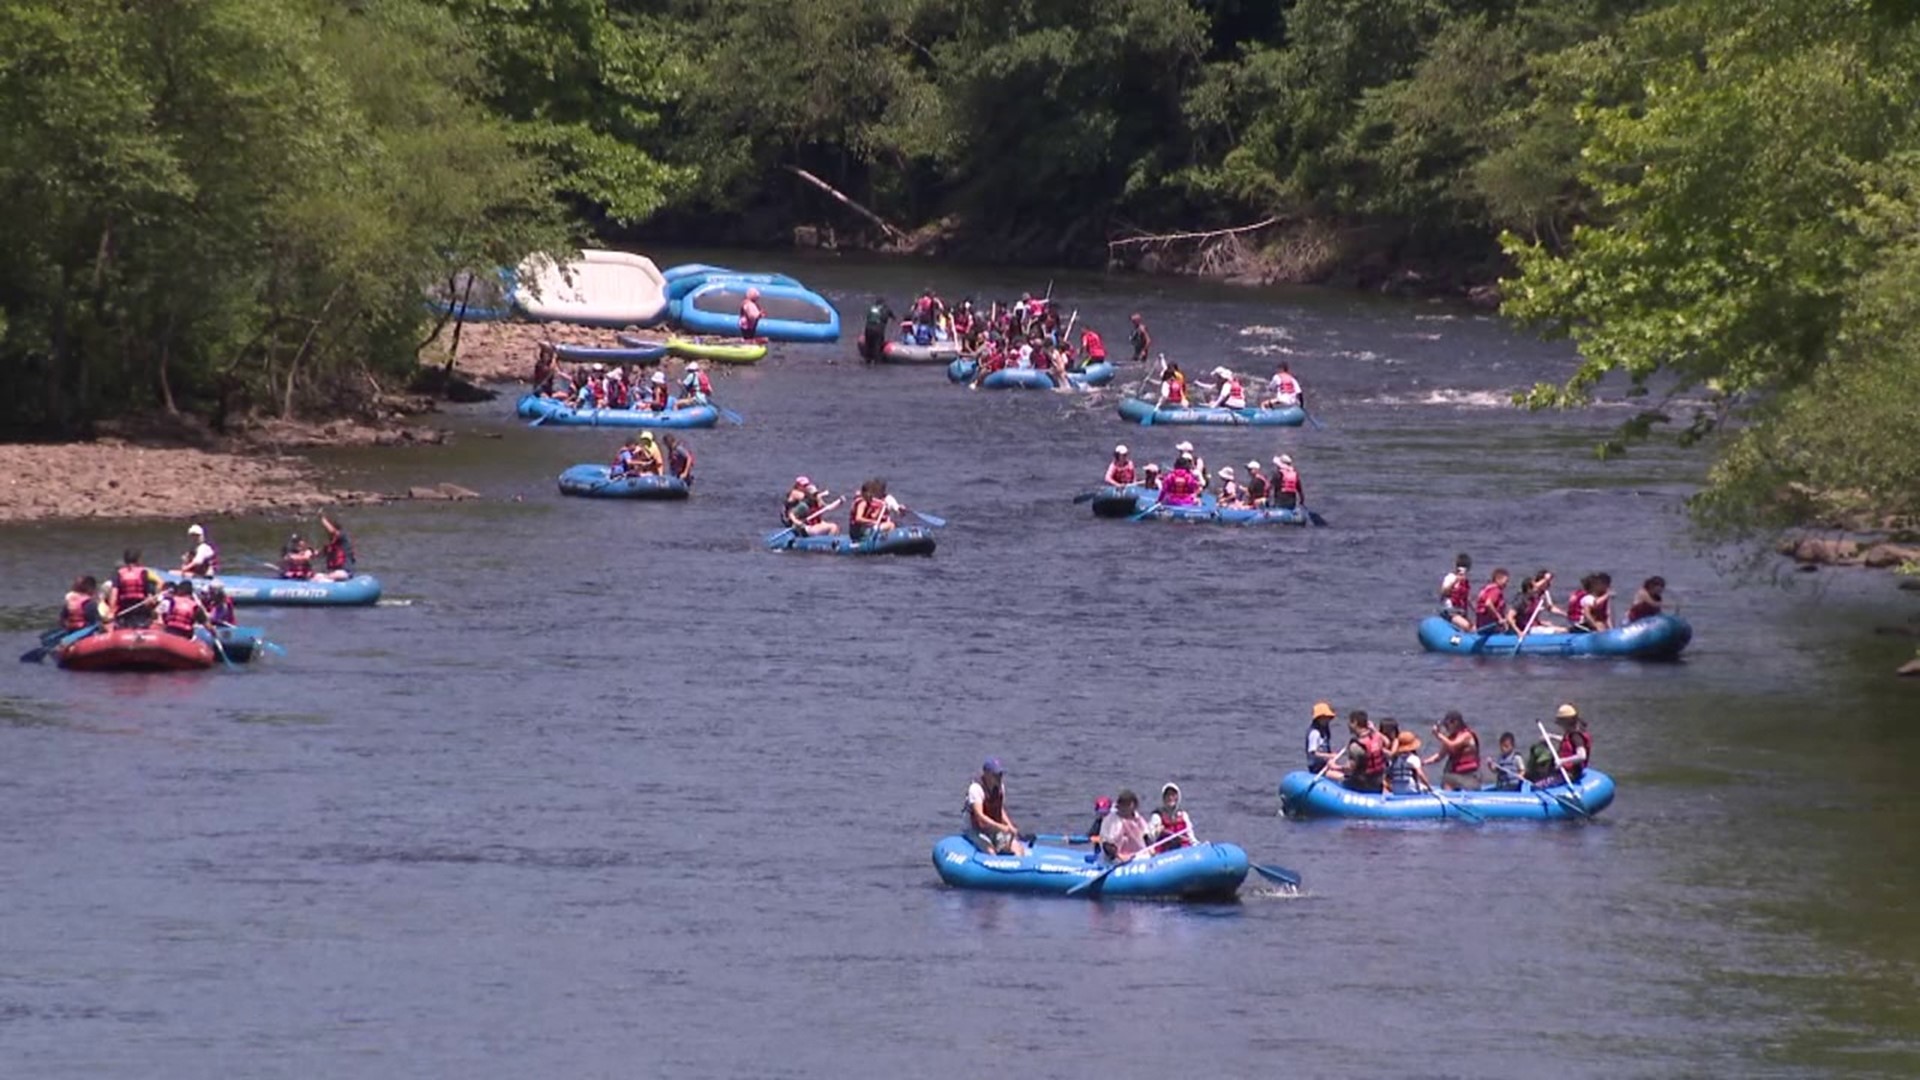 Pocono Whitewater Rafting says they've been busy all holiday weekend long with people wanting to get out on the river.